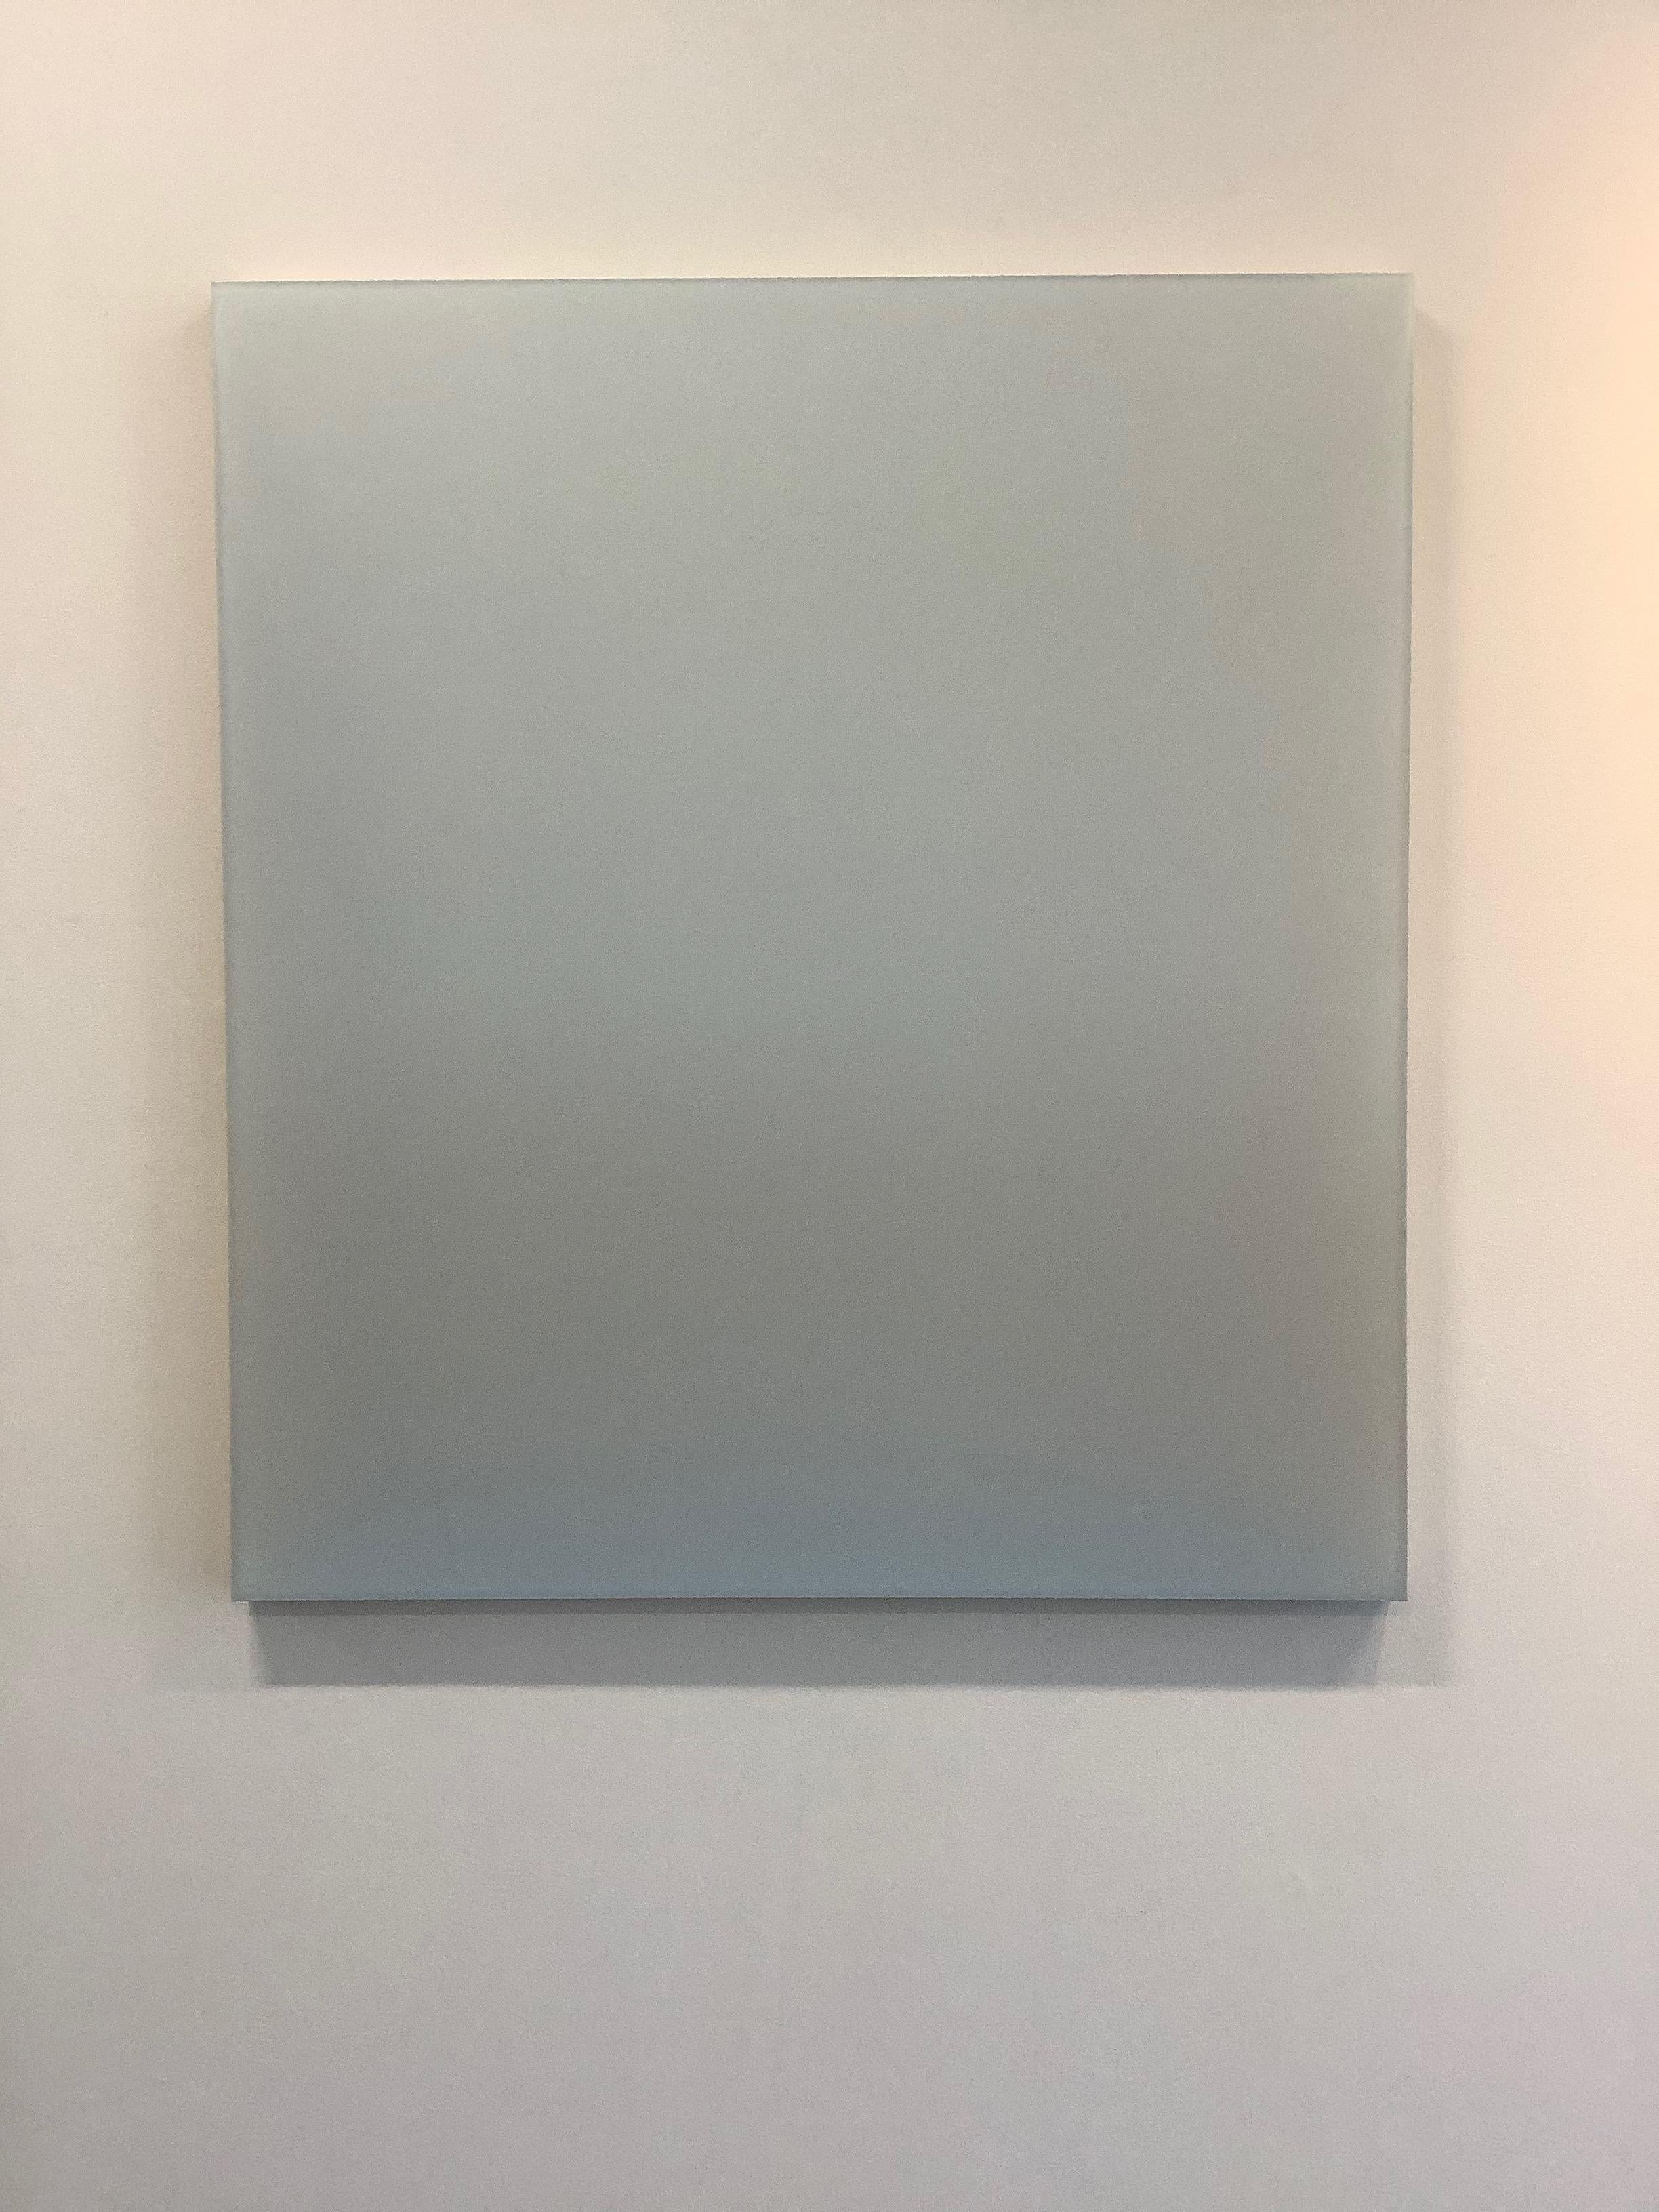 Matte but luminous, Outland No. 13 by Susan English is a wonderful play of color, light, and composition. Hues of opaque blue at the bottom meet and merge in subtle transitions with pale, icy blue tones in soft, horizontal planes. The layers of